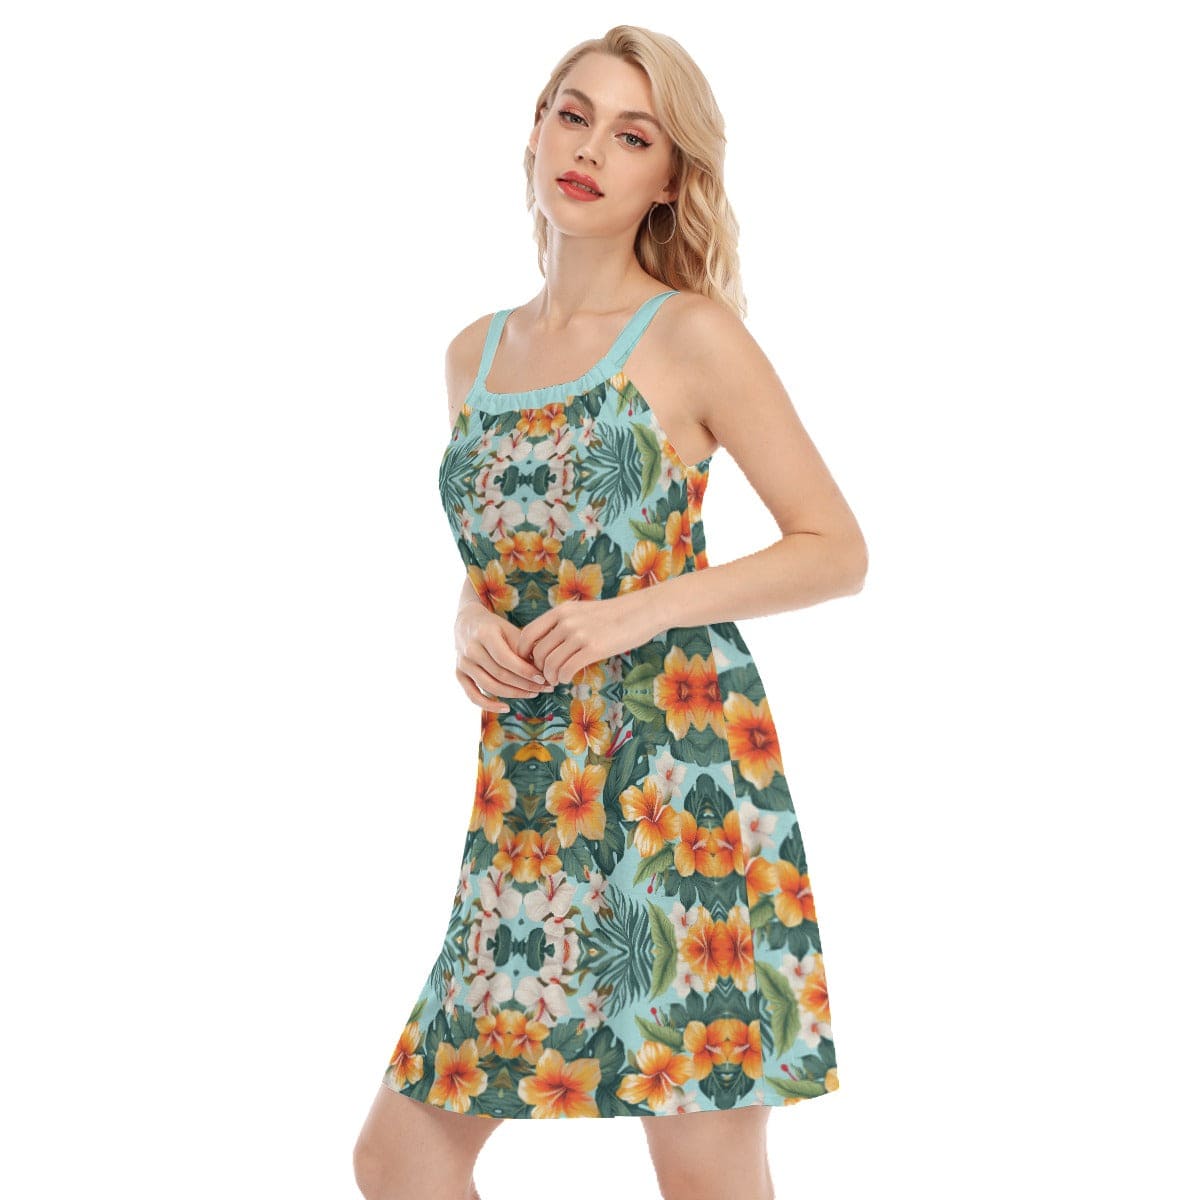 Yoycol Hibiscus Cove - All-Over Print Women's Sleeveless Cami Dress